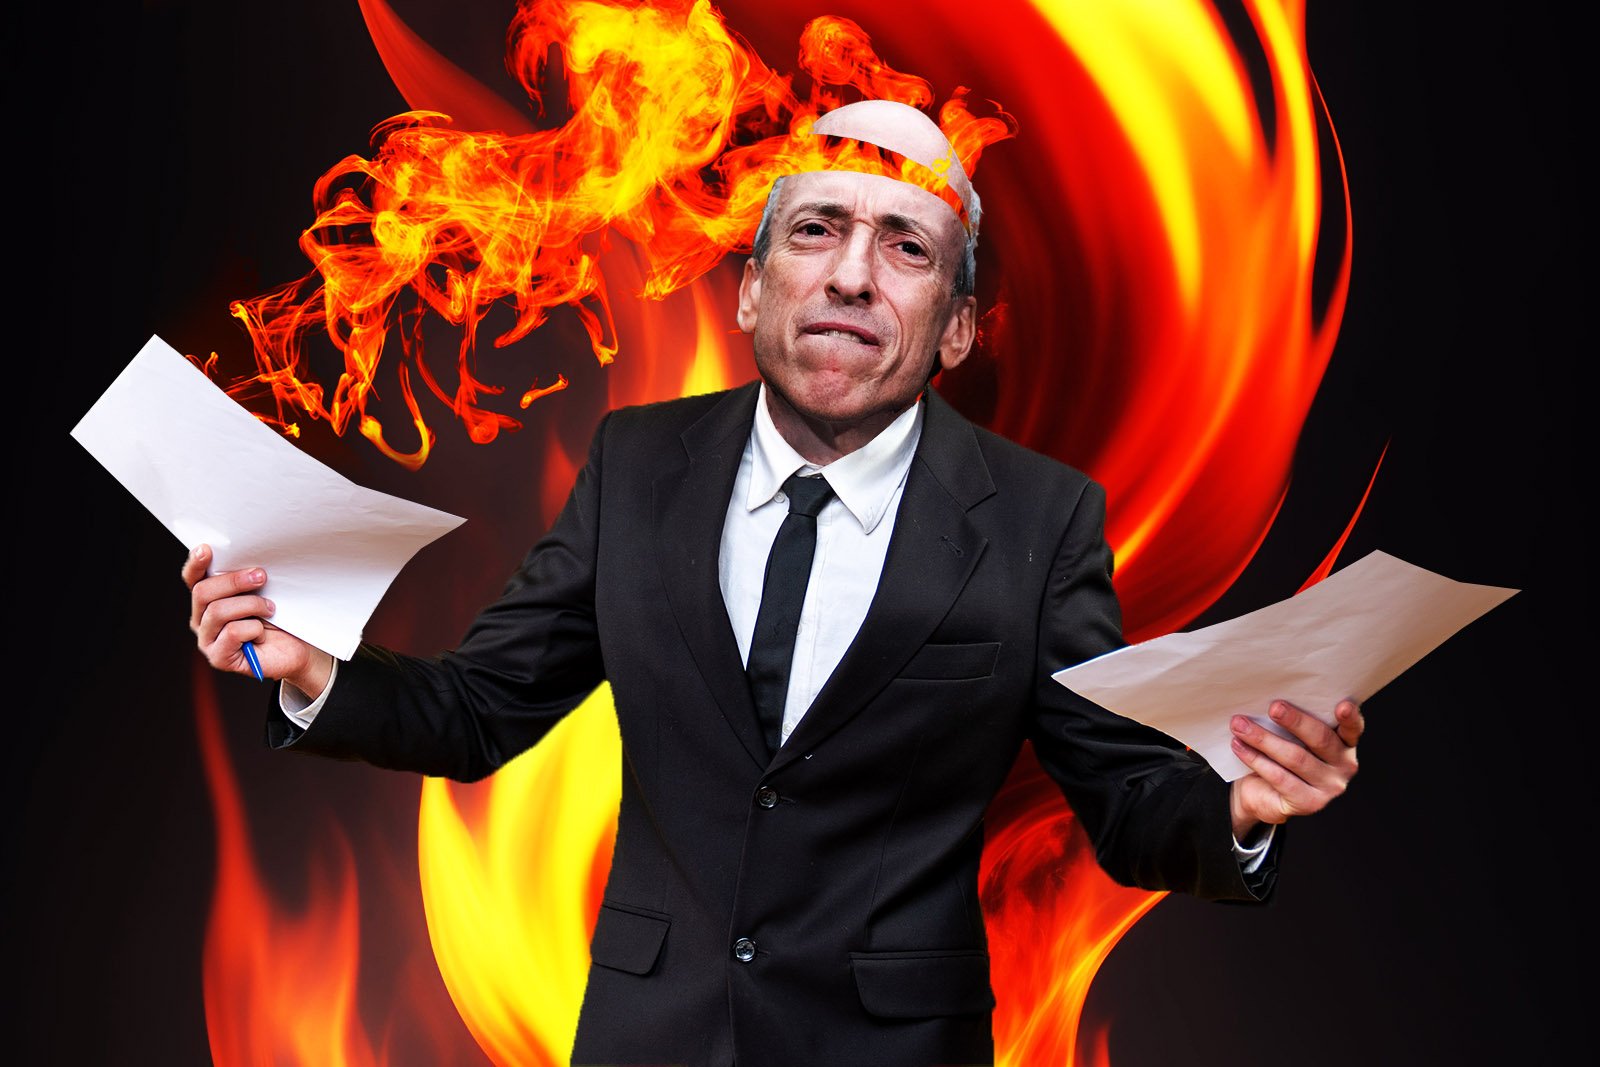 Angry Gary Gensler holding two pieces of paper in front of burning fire.